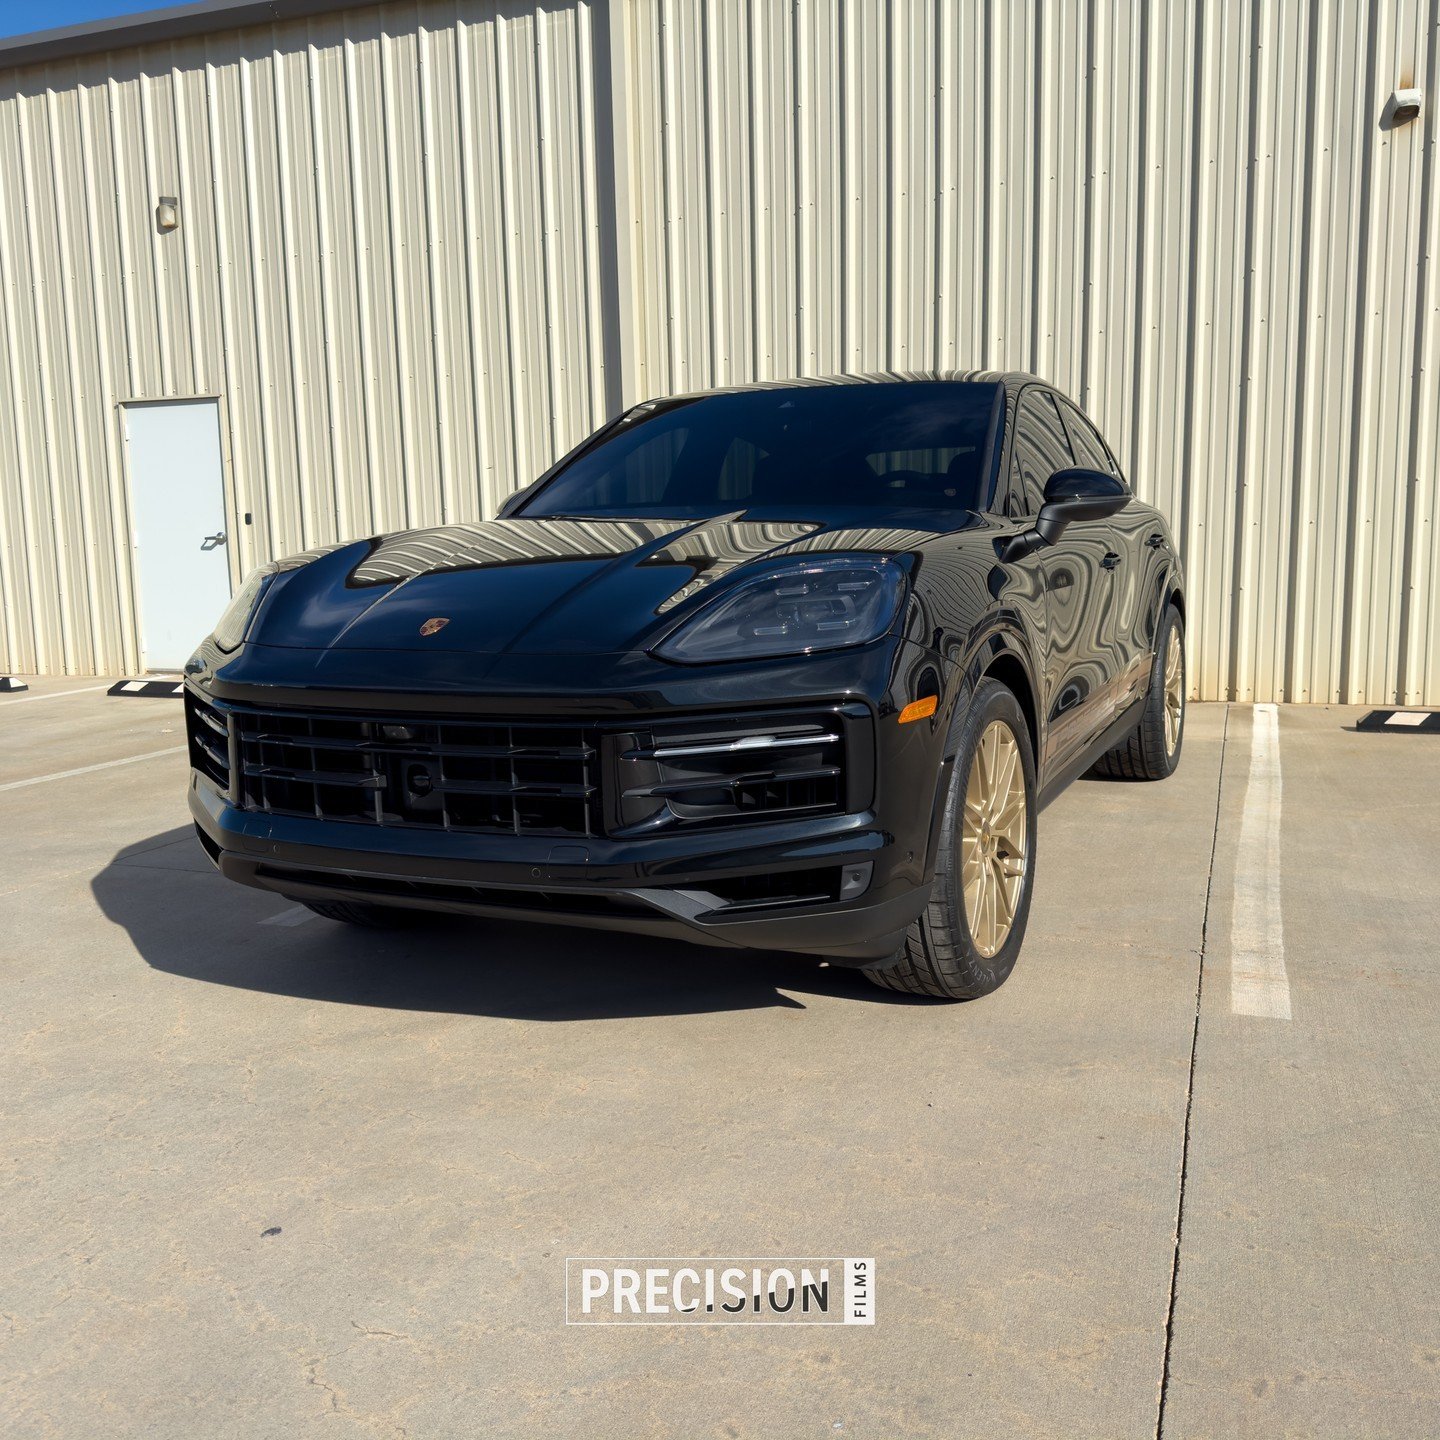 Sleek and Sophisticated with a side of Swag!

This Cayenne received PPF, Ceramic Tint, Rocker stripes, powder coated wheels, a 2 step paint correction plus Ceramic pro!

#precisionfilmsokc #porsche #cayenne #porschecayenne #powderrangers